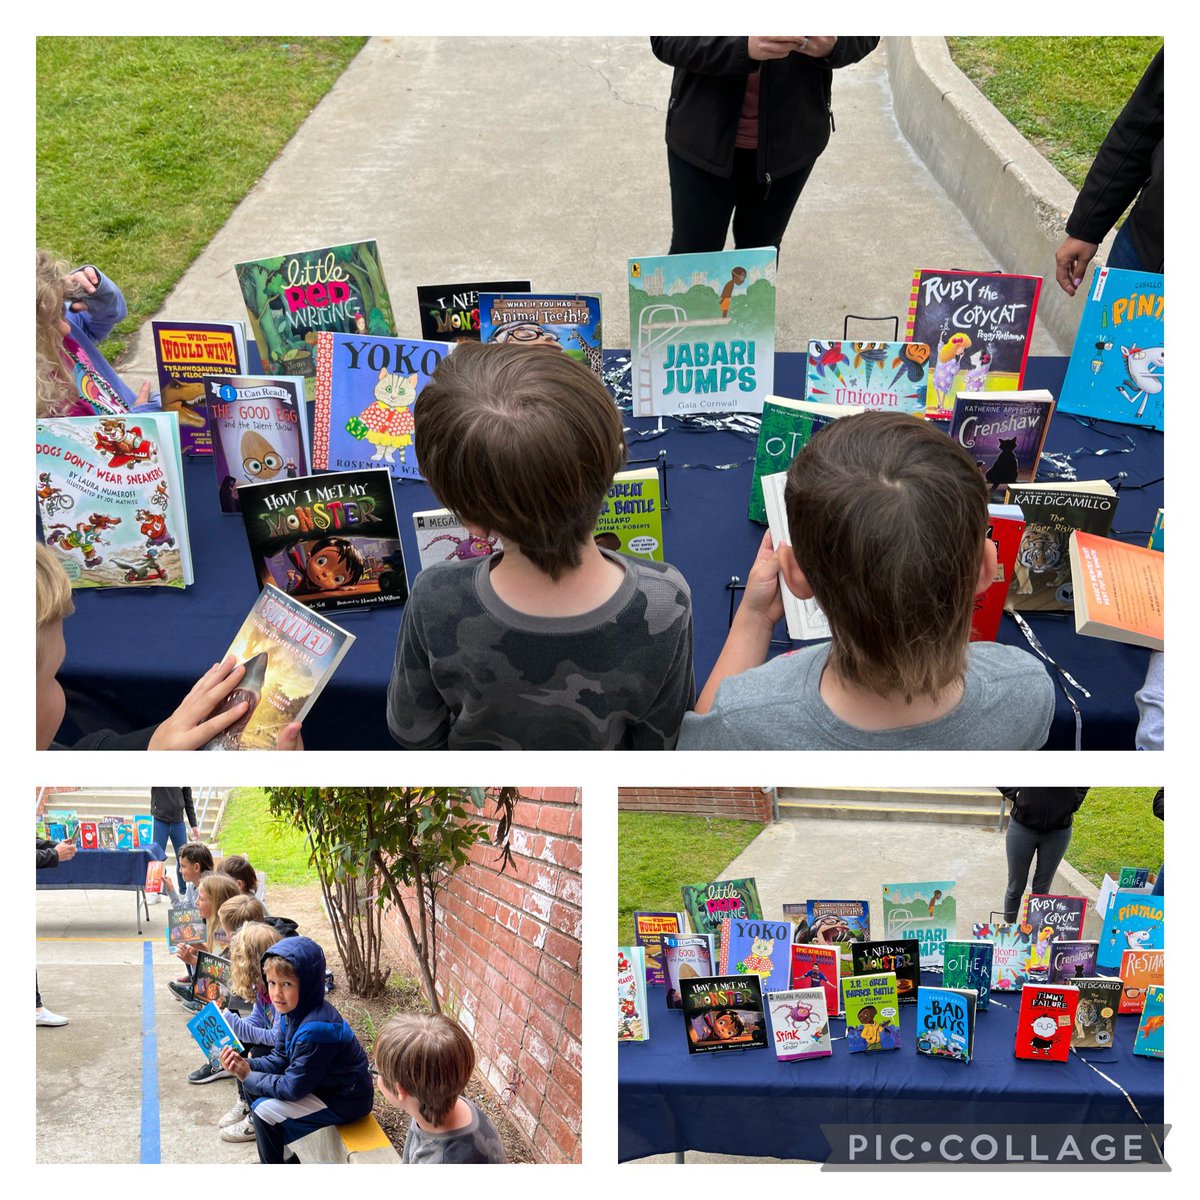 We loved being a stop for the FAD Bookmobile yesterday, where students who completed all 60 squares for the FSD Galactic Reading Challenge were able to pick out a book of their choice to keep and read! Literacy is cool!! KEEP READING GATORS!! #ghgators #ghscpa